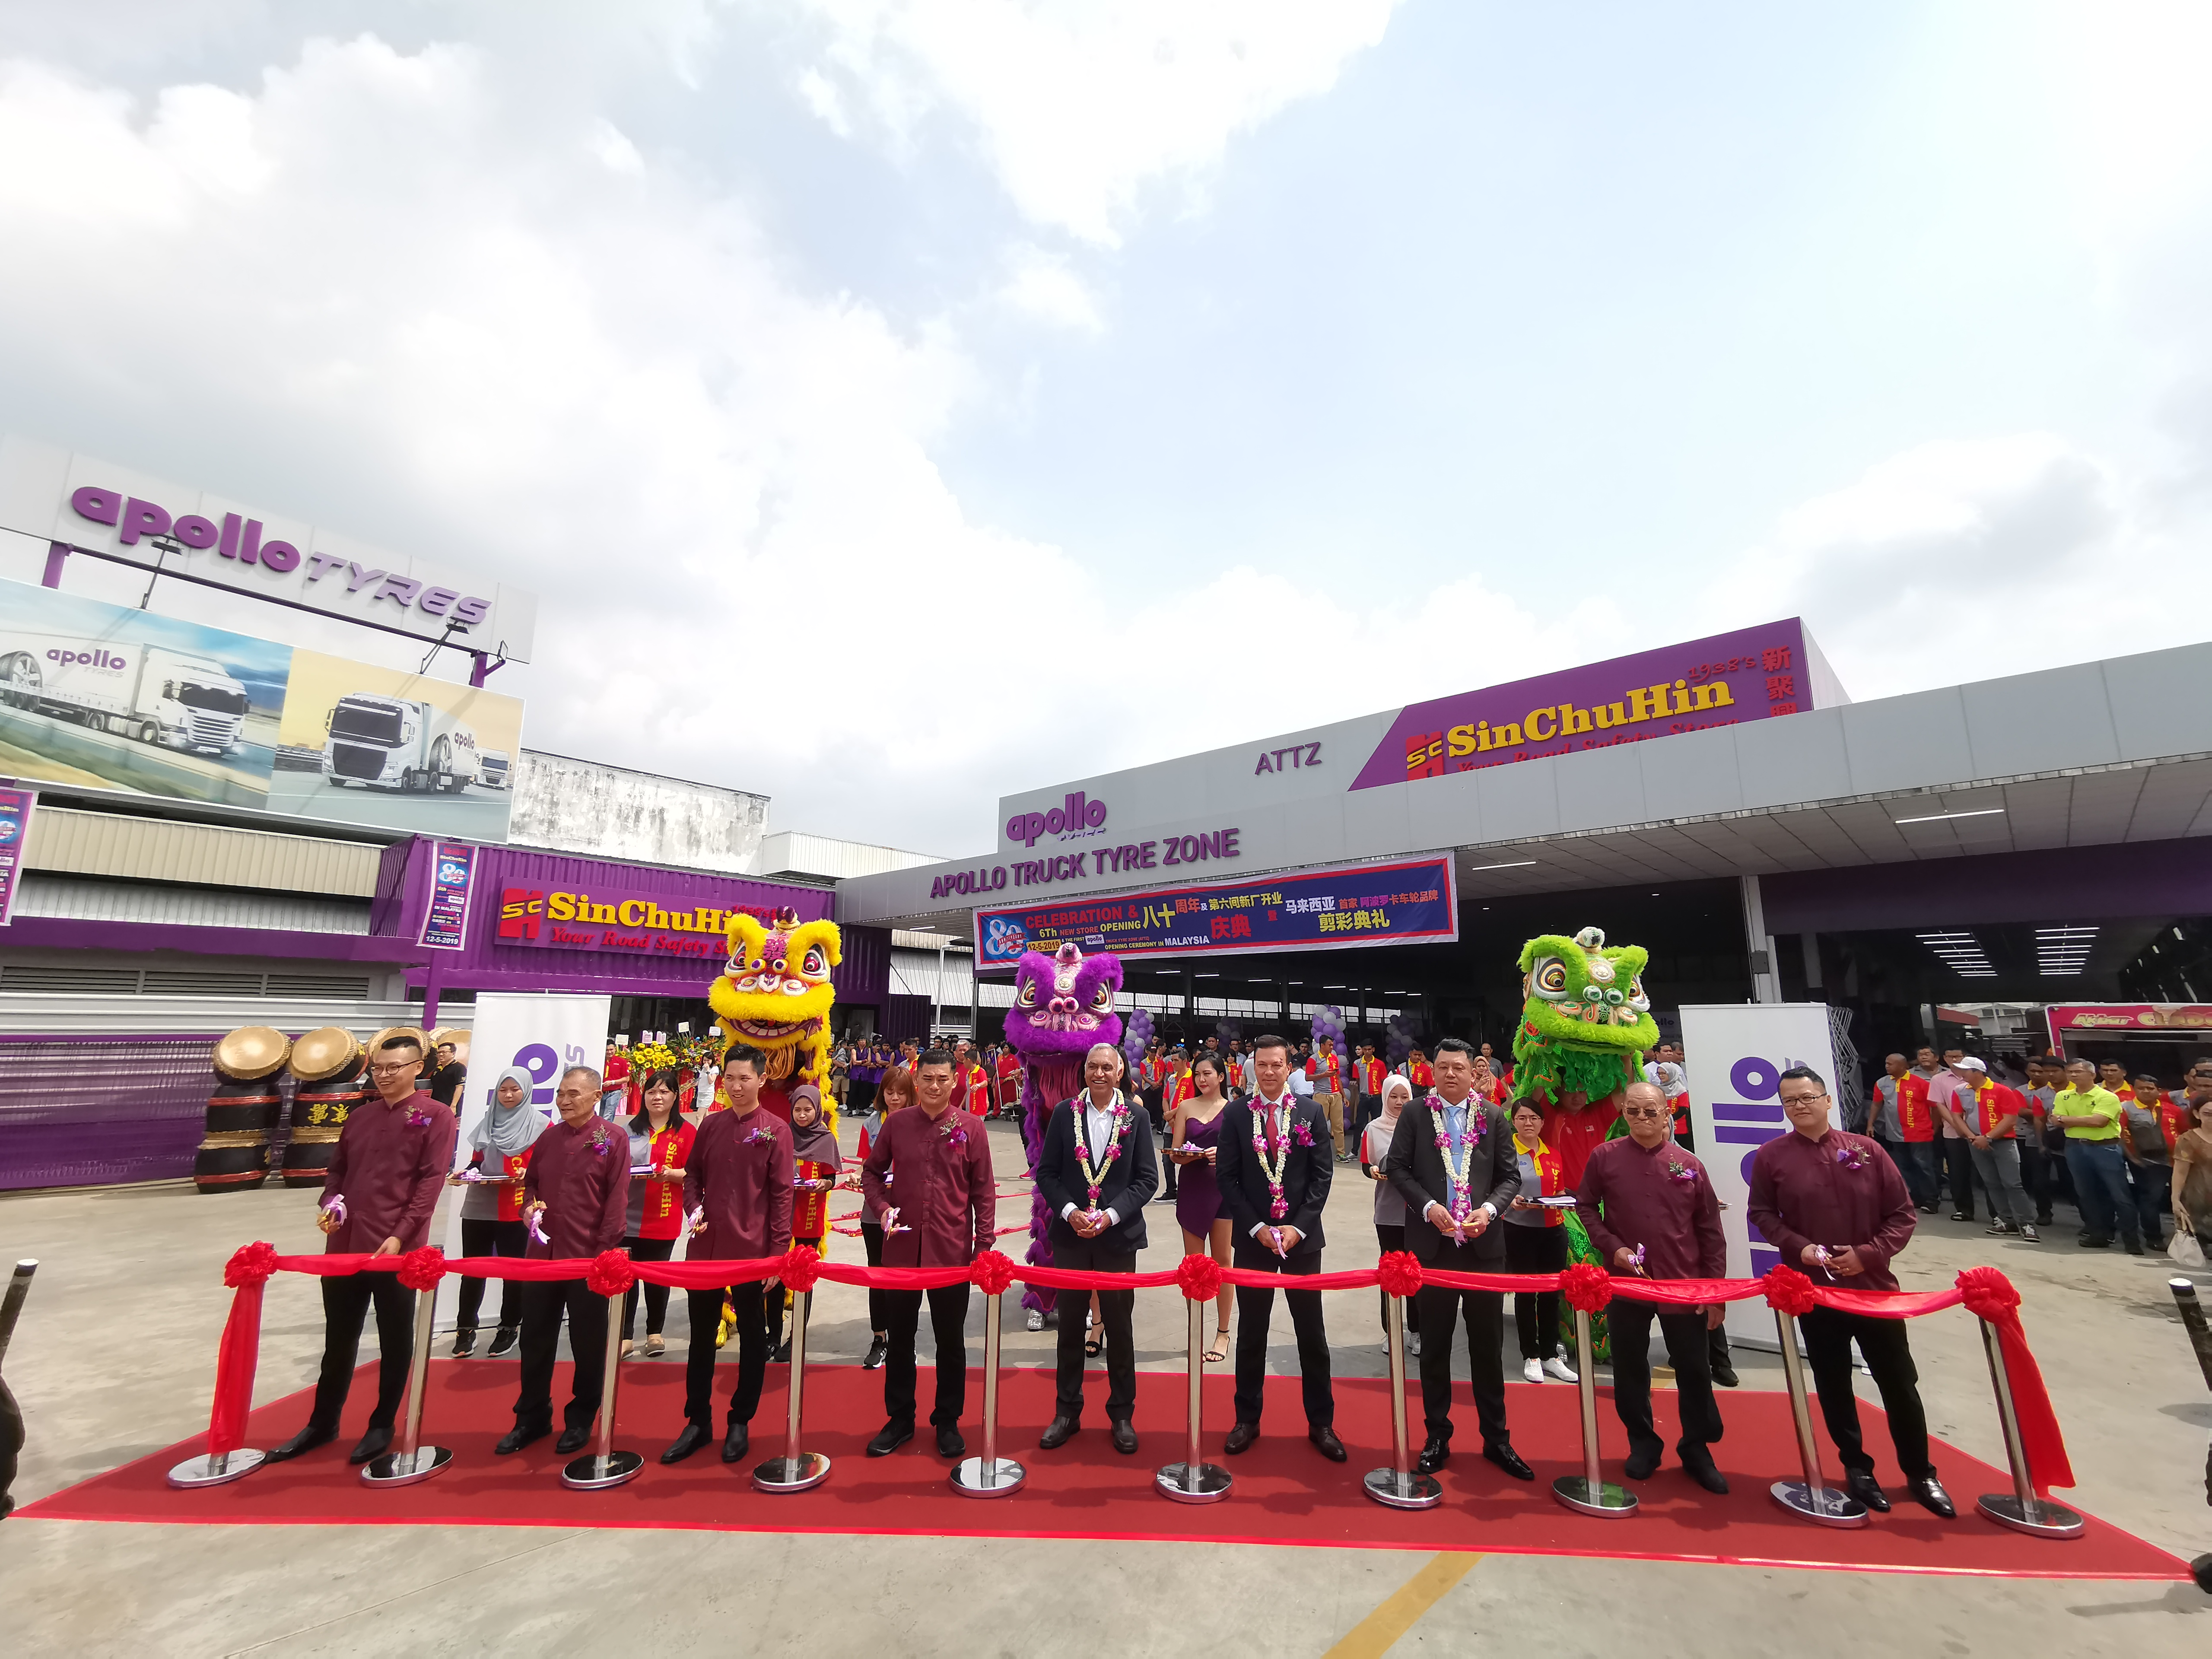 Launch Of Apollo Tyres' First Truck Tyre Zone (attz) In Malaysia.